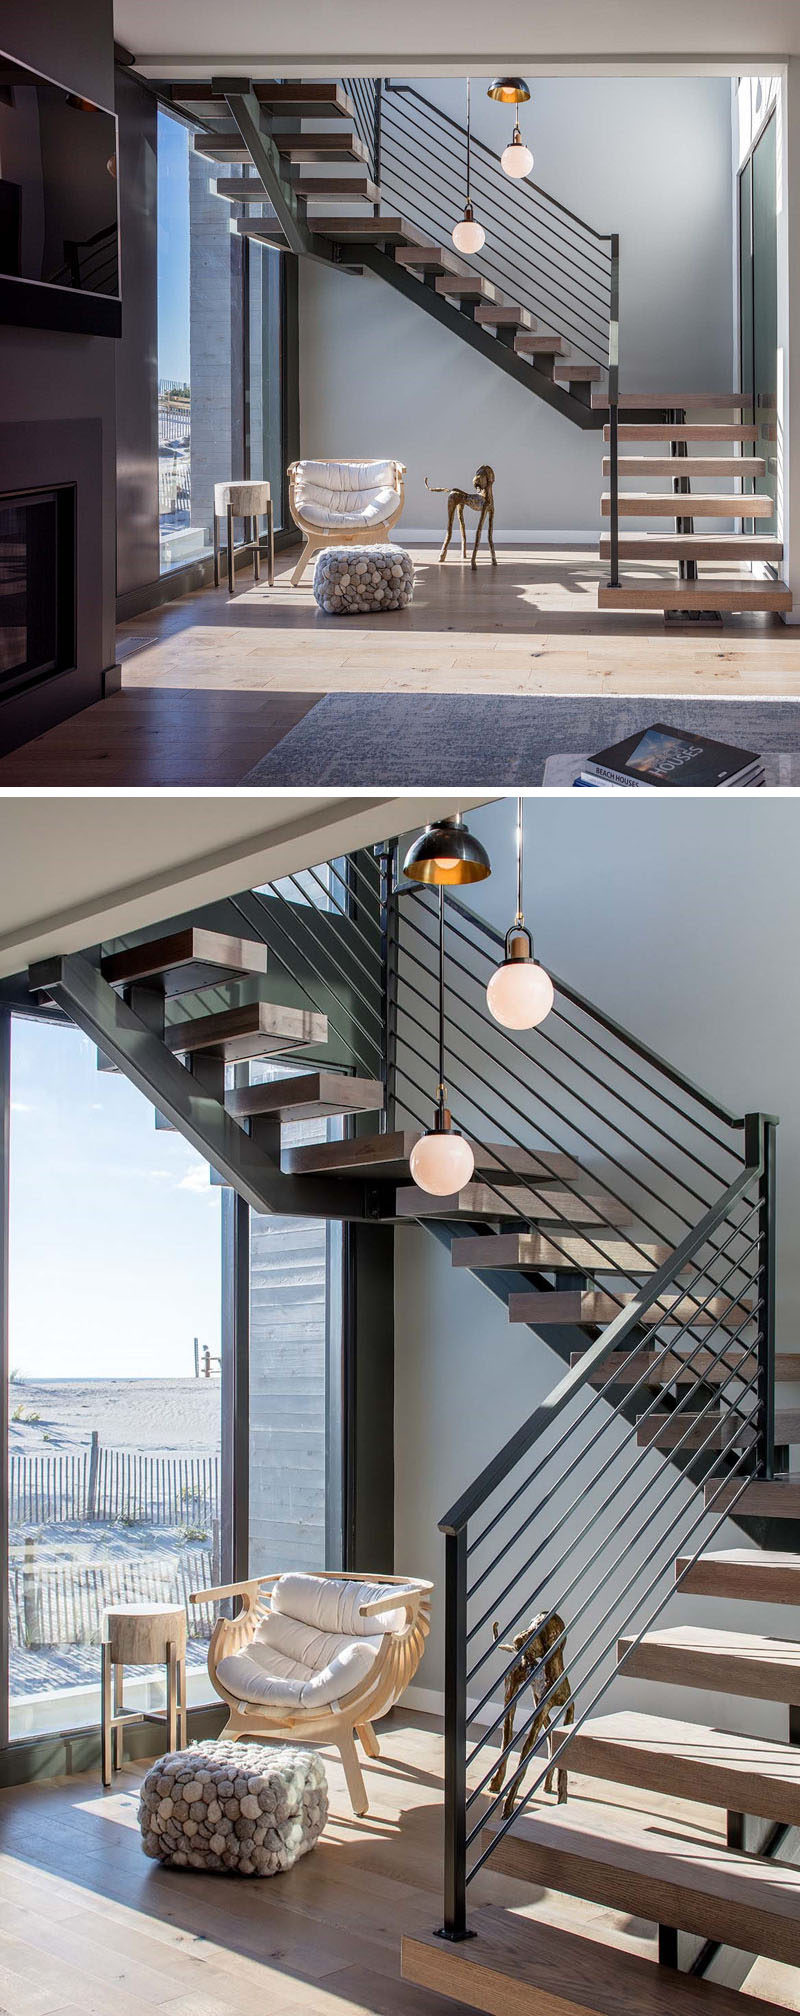 Wood and steel stairs lead to the upper level of this beach home and wrap around a stairwell light designed by Colony – Allied Maker.